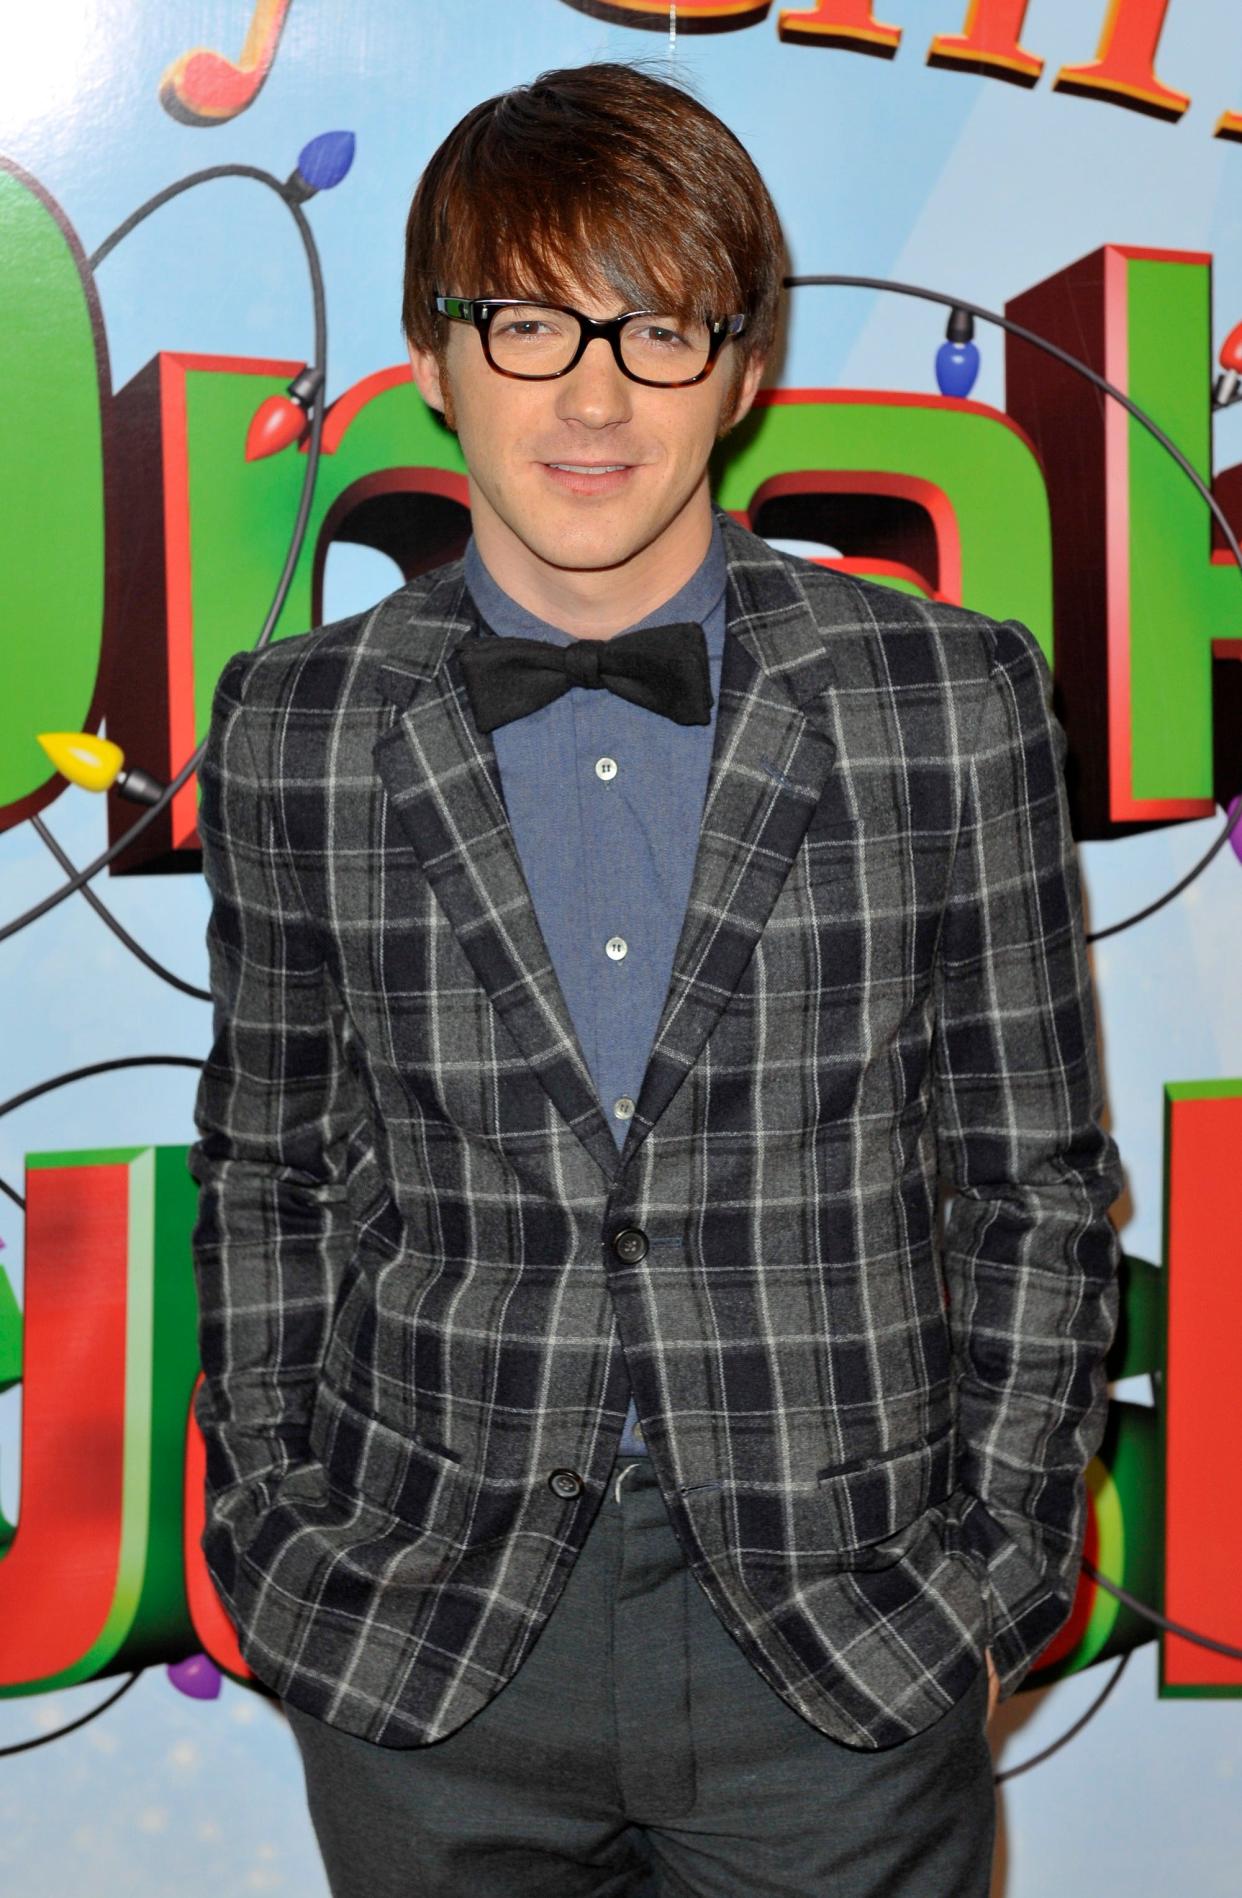 Drake Bell at the premiere of "Merry Christmas, Drake & Josh!" on Dec. 2, 2008, in Los Angeles/